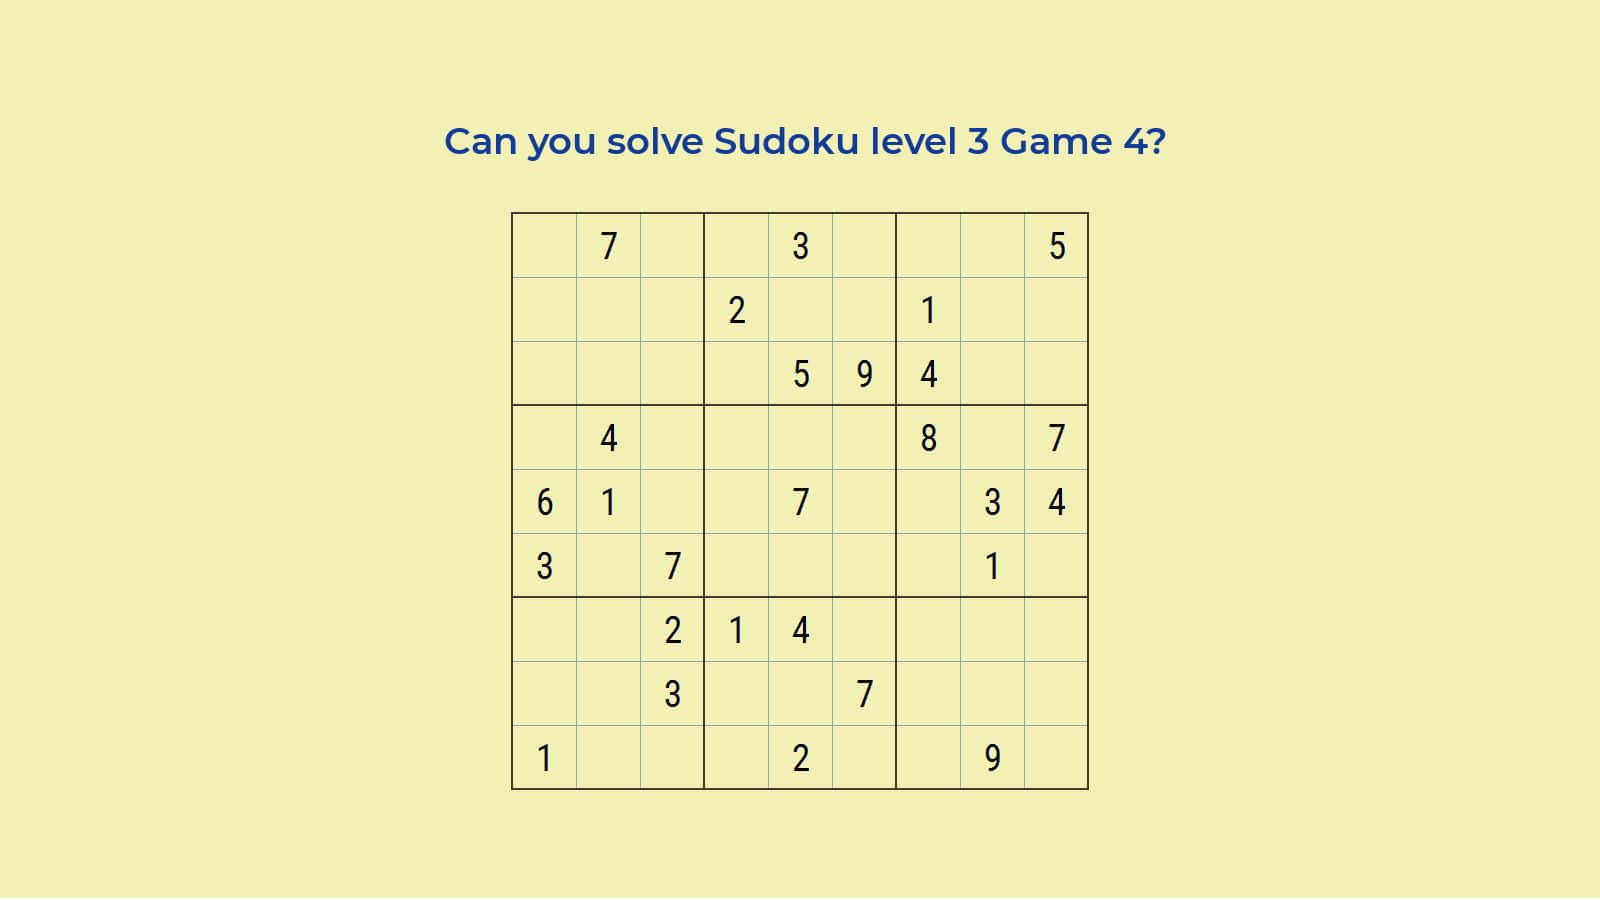 Sudoku level 3 Game 4: Breakthroughs by Hard Sudoku Techniques